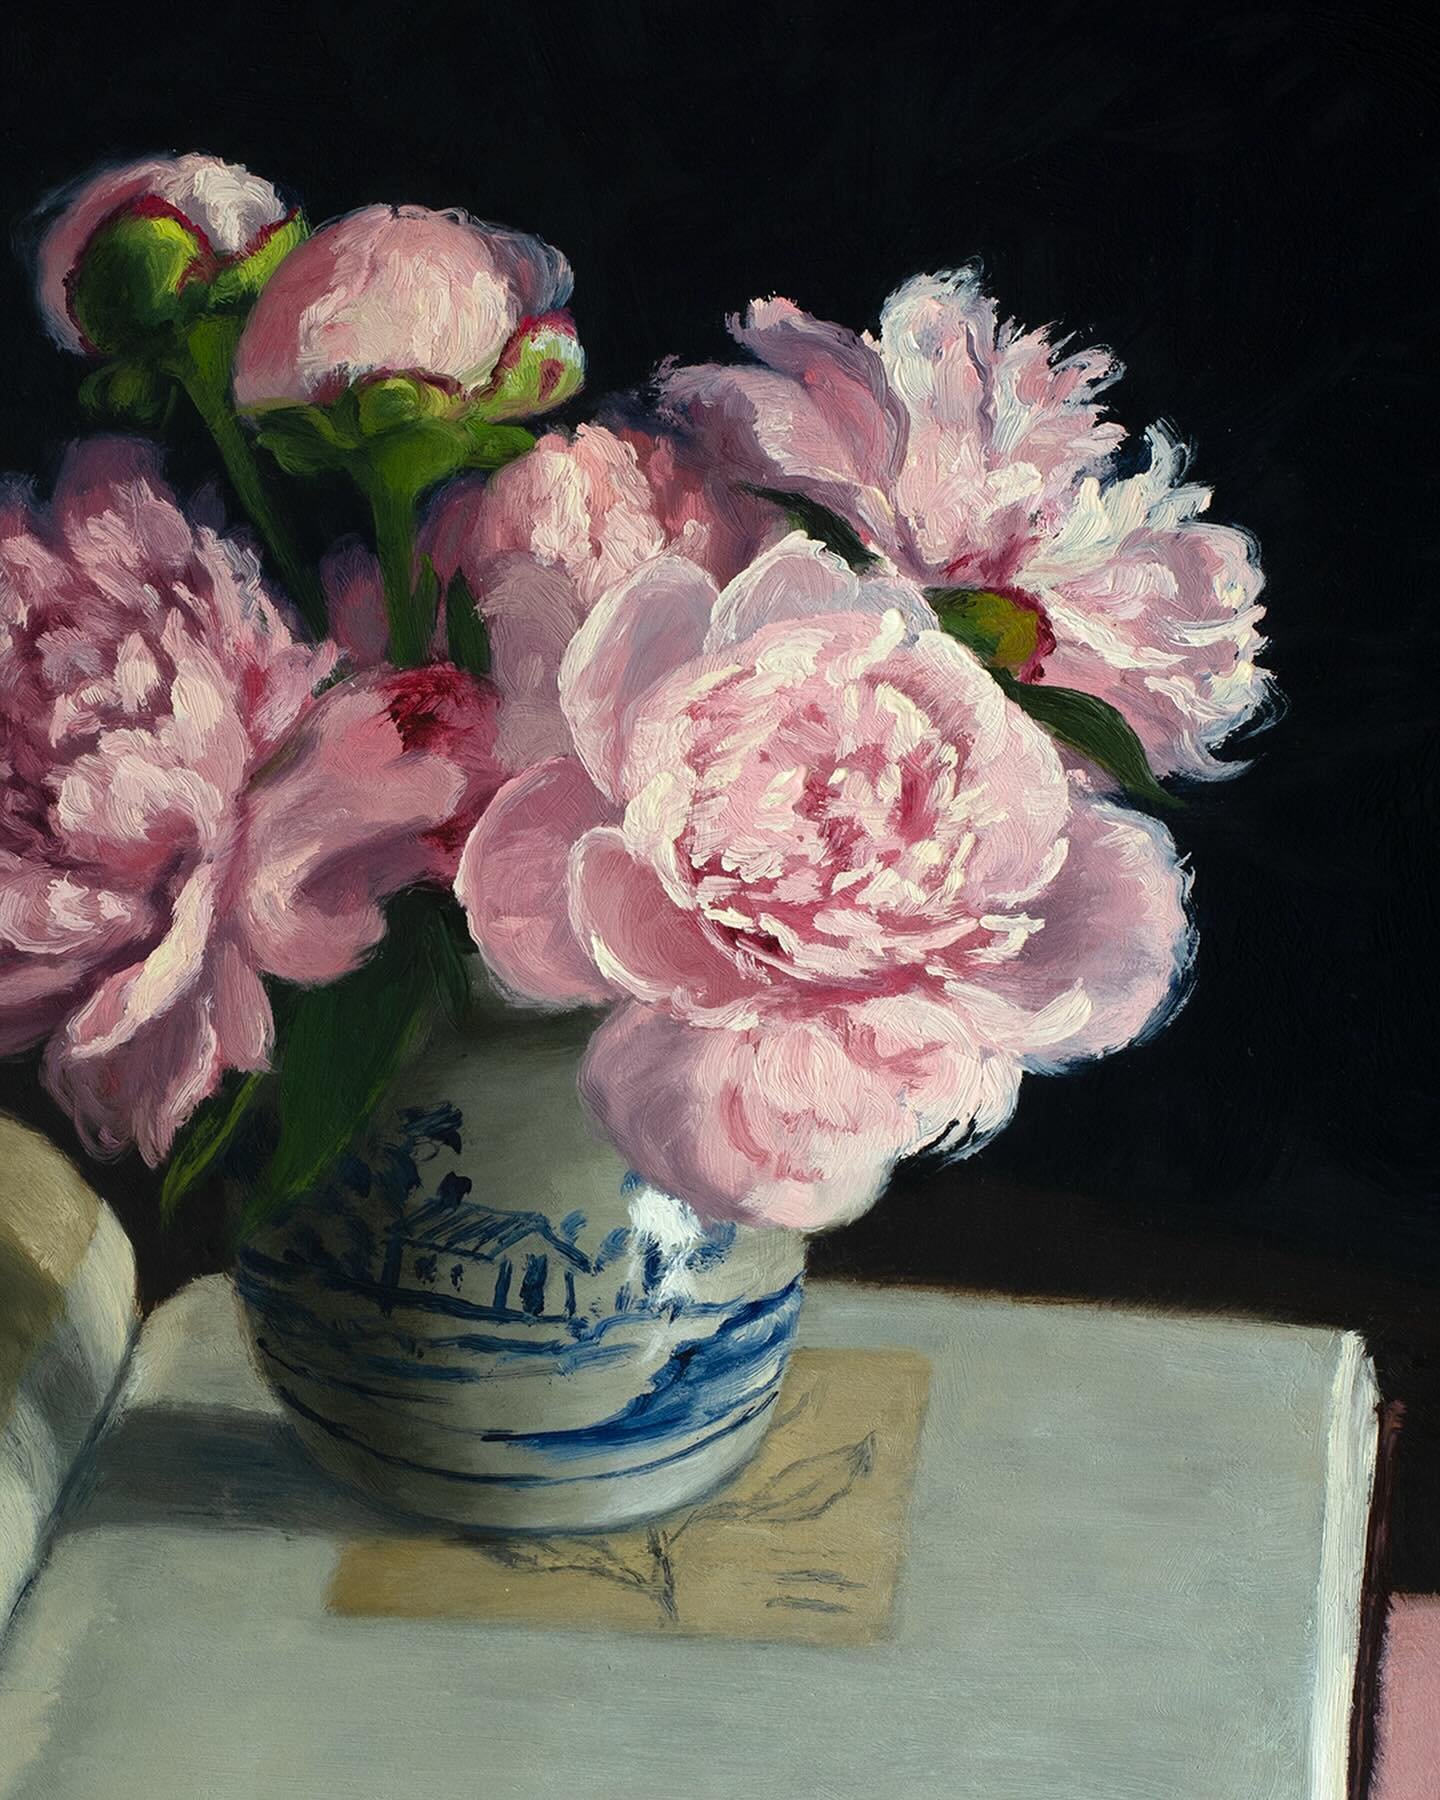 &ldquo;Peonies on Open Book&rdquo; 2023, oil on panel, 16x12 inches for MEMORIES in BLOOM, my major solo exhibition for 2024 at&nbsp;@principle_charleston ⁠
⁠
Catalog available by emailing art@principlecharleston.com 

#Elizabethfloydart #memoriesinb